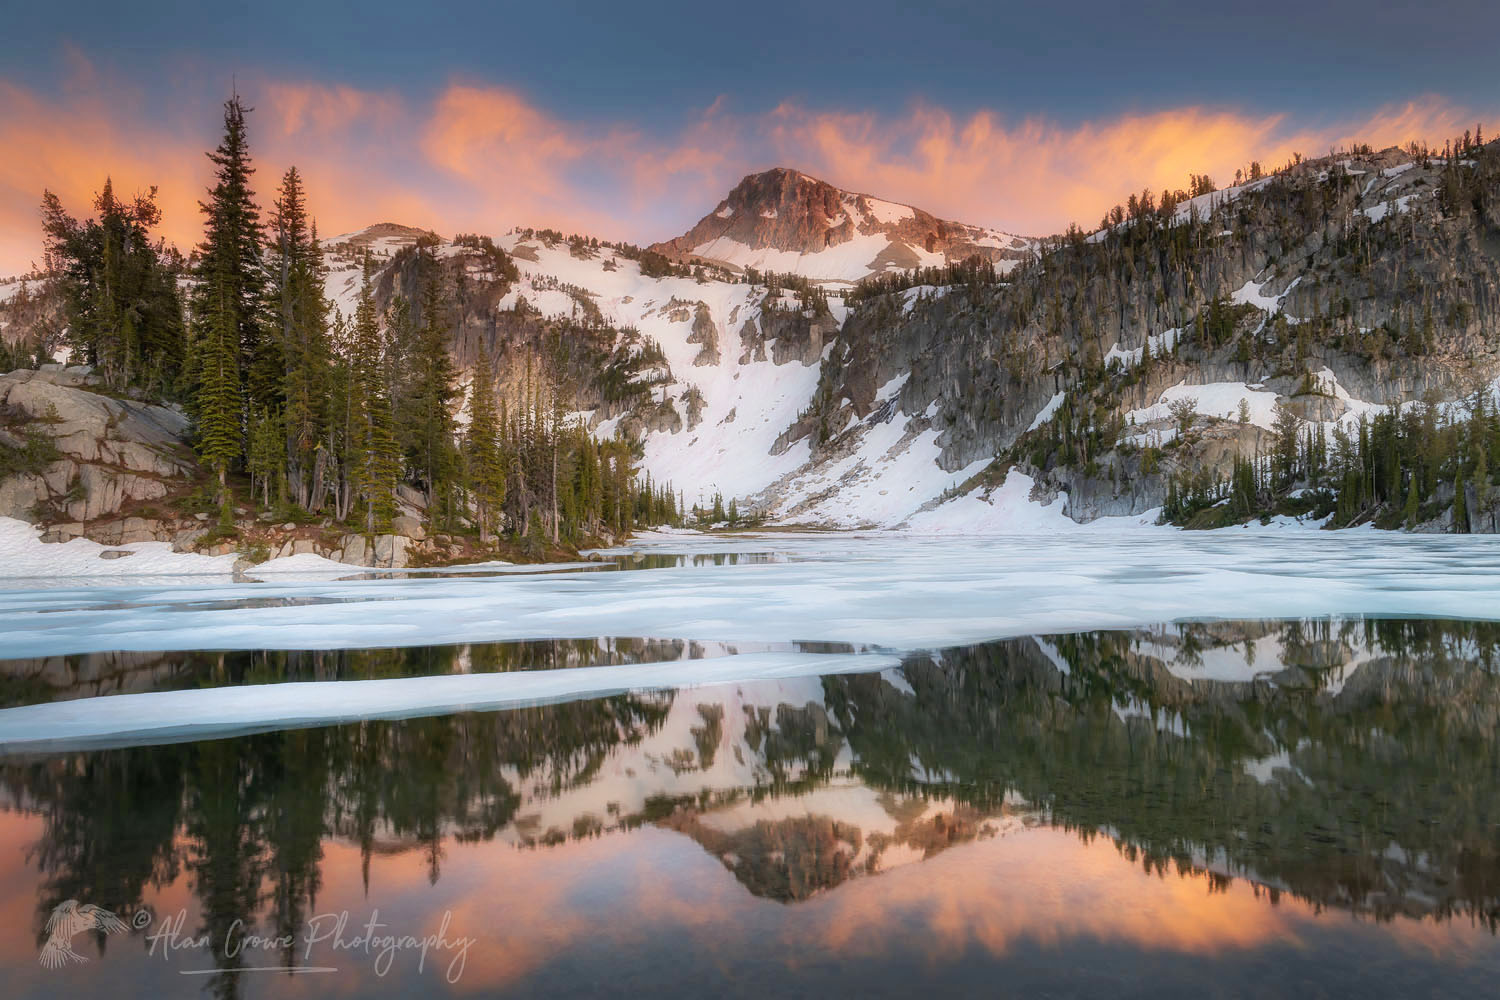 Alpenglow over Eagle Cap reflected in Mirror Lake, Eagle Cap Wilderness, Wallowa Mountains, Oregon #68749or